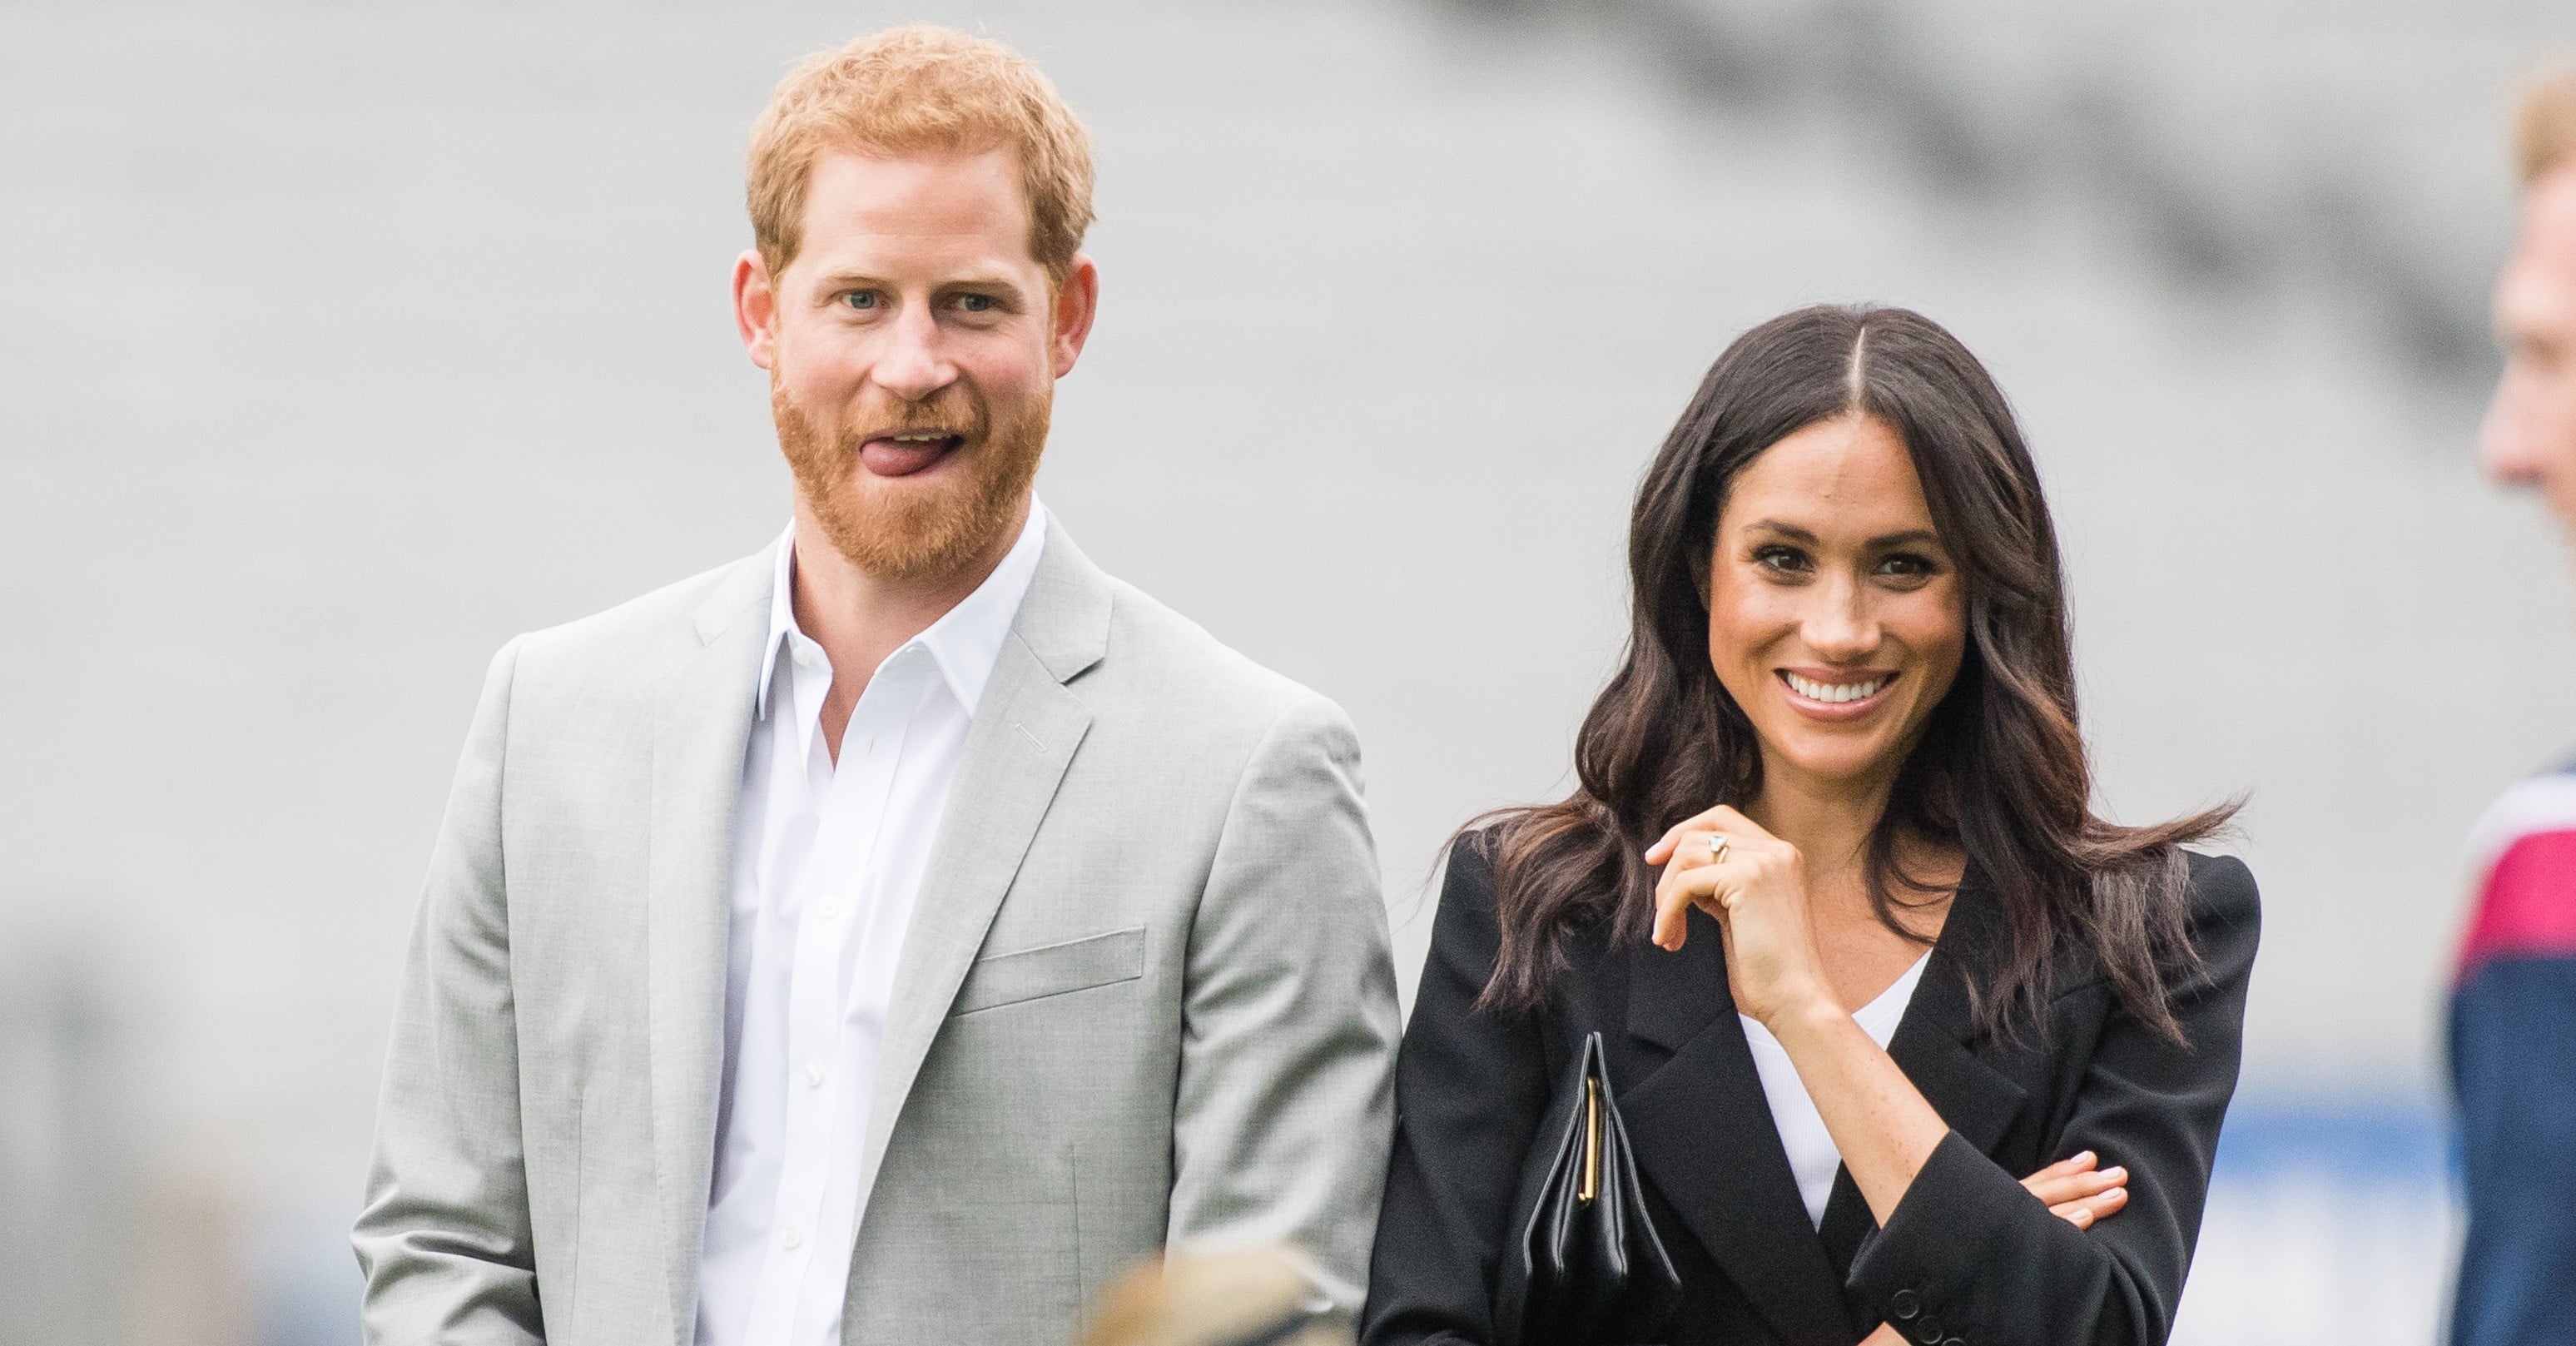 Prince Harry and Meghan Markle Ireland Tour Pictures | POPSUGAR Celebrity